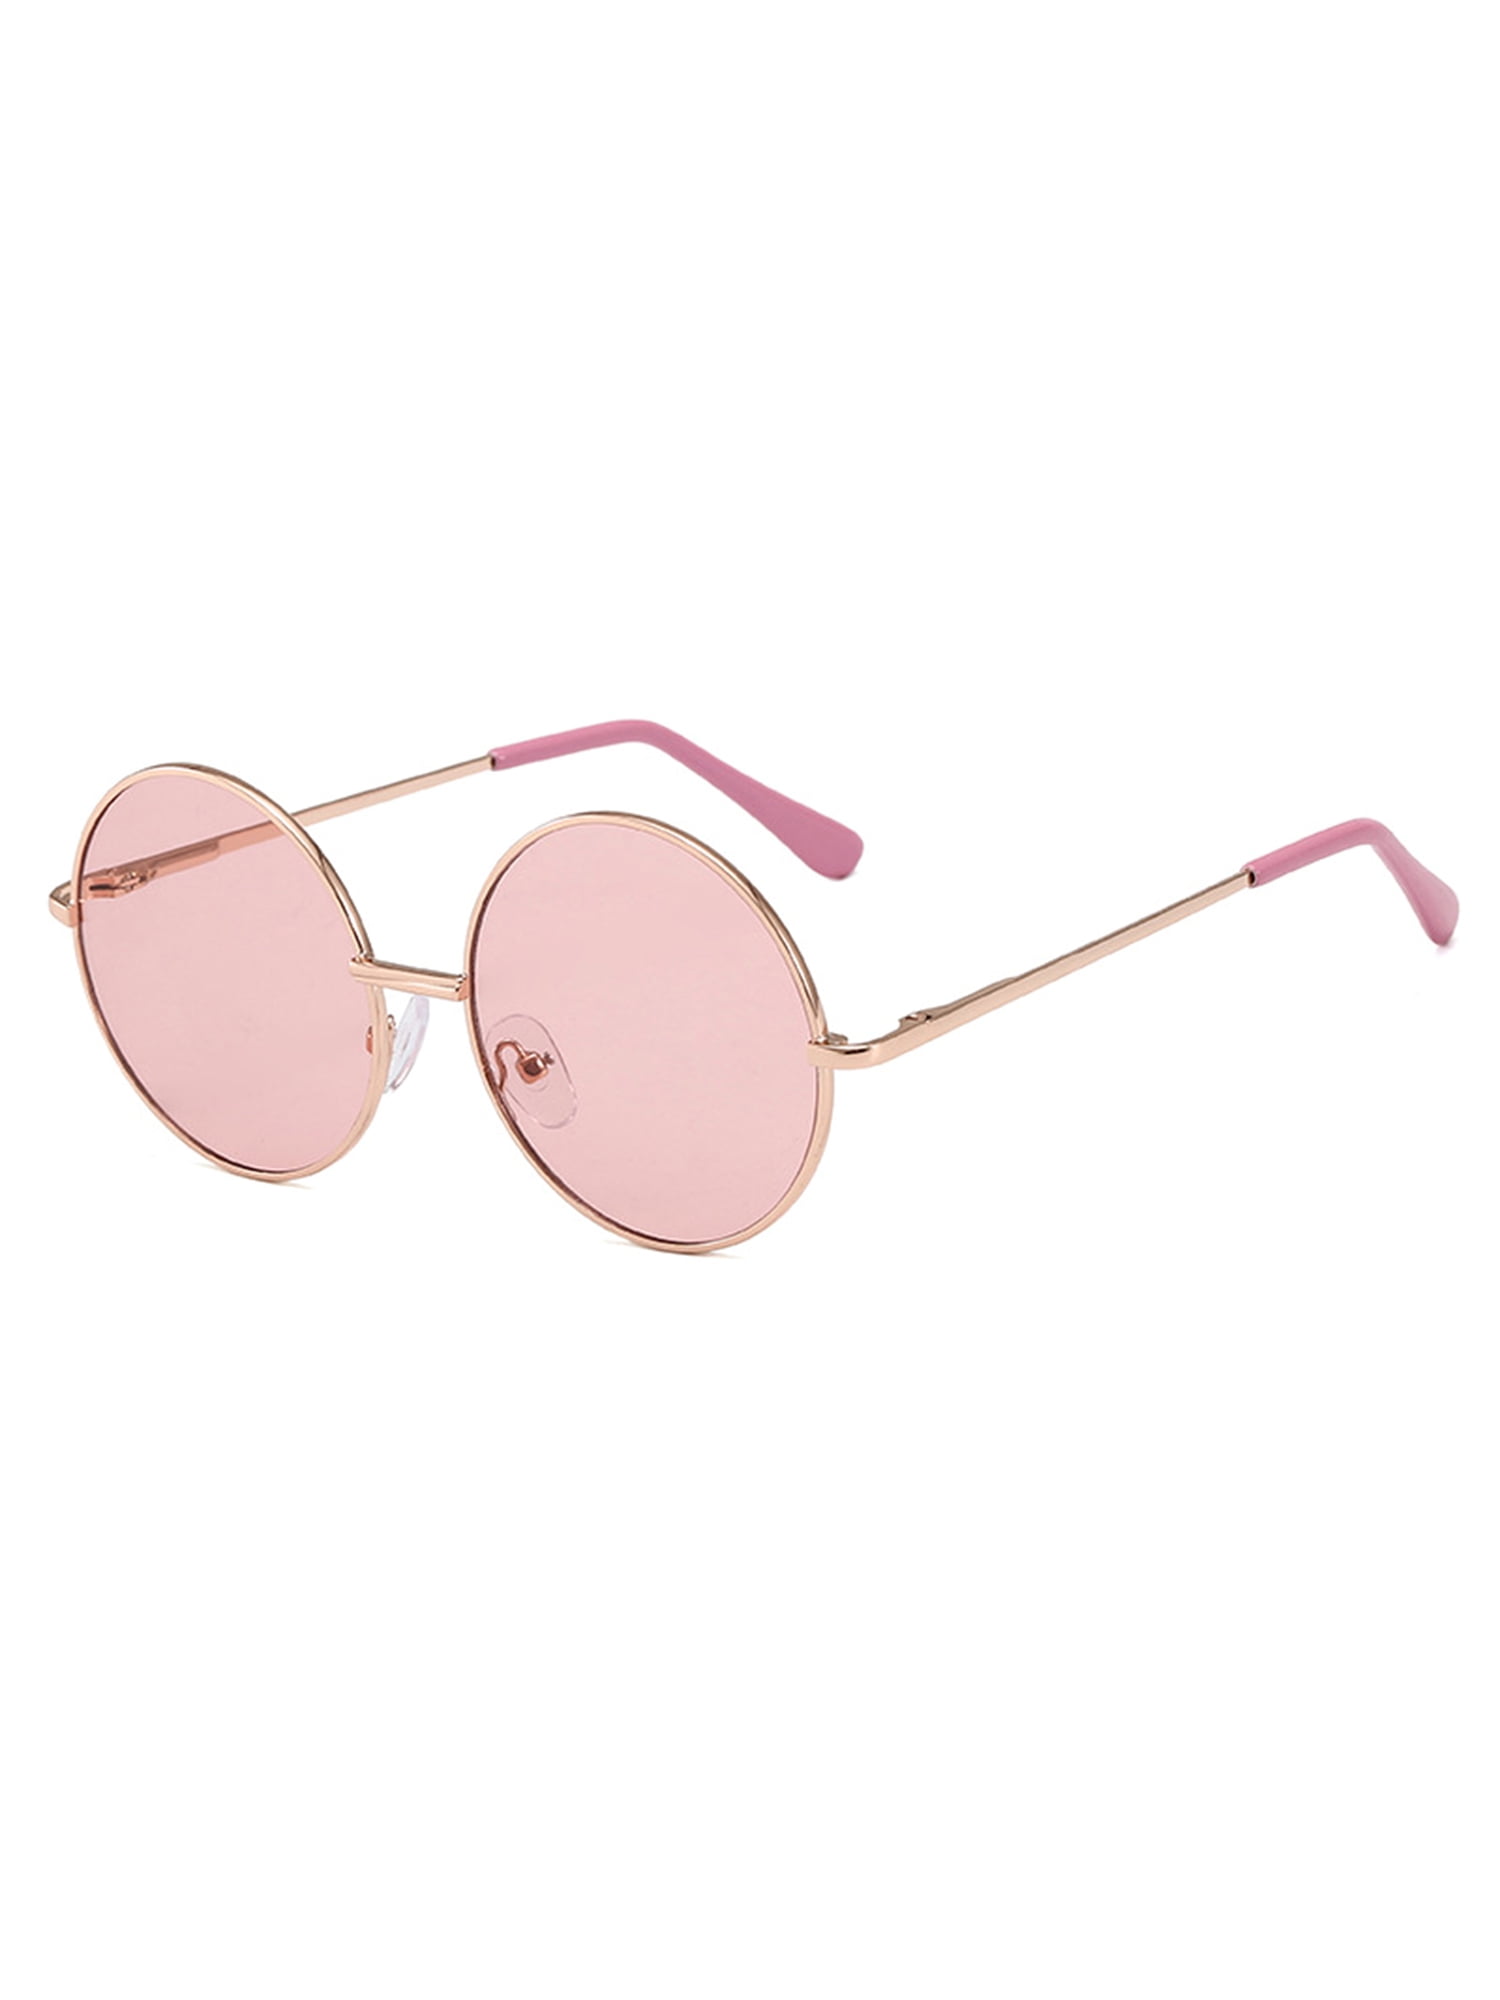 Oversized Oh Yea New York Fashion SUNGLASSES(KIDS-TEEN) Clear Diamond-Pink Lens Recommended for Ages 4 Years - Adults